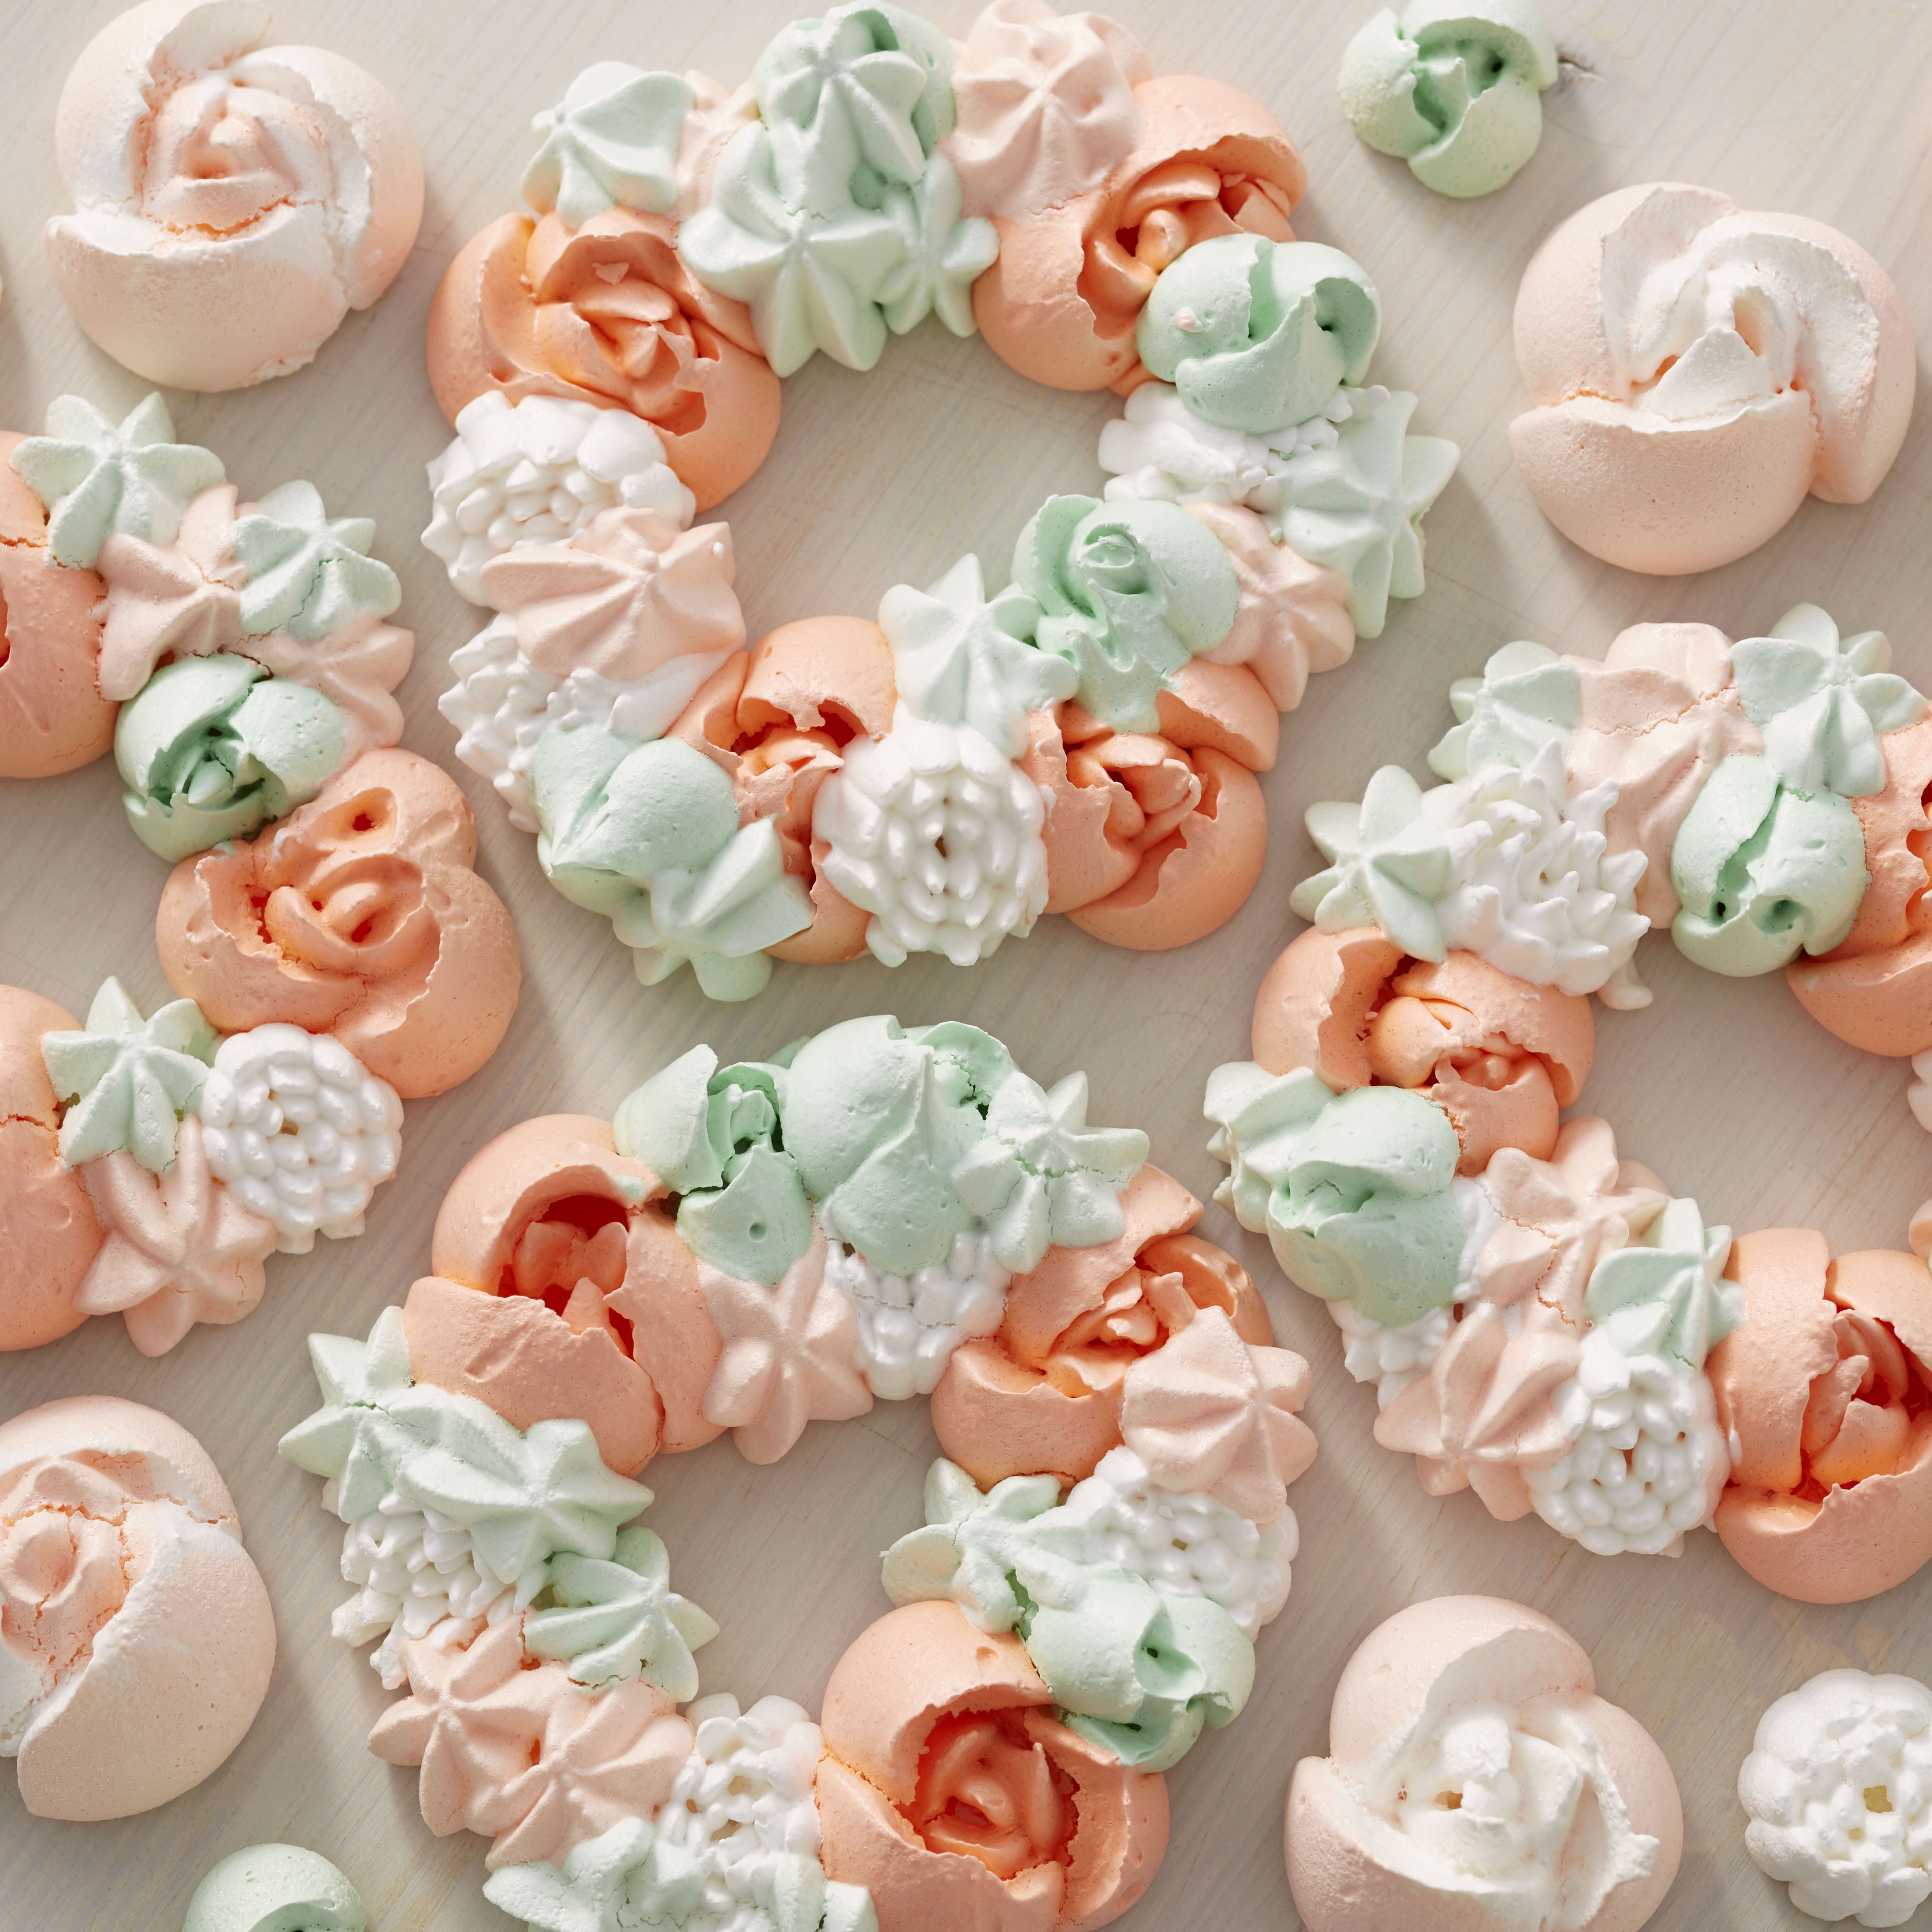 Meringue Powder Substitute In Icing - Royal Icing Without ...